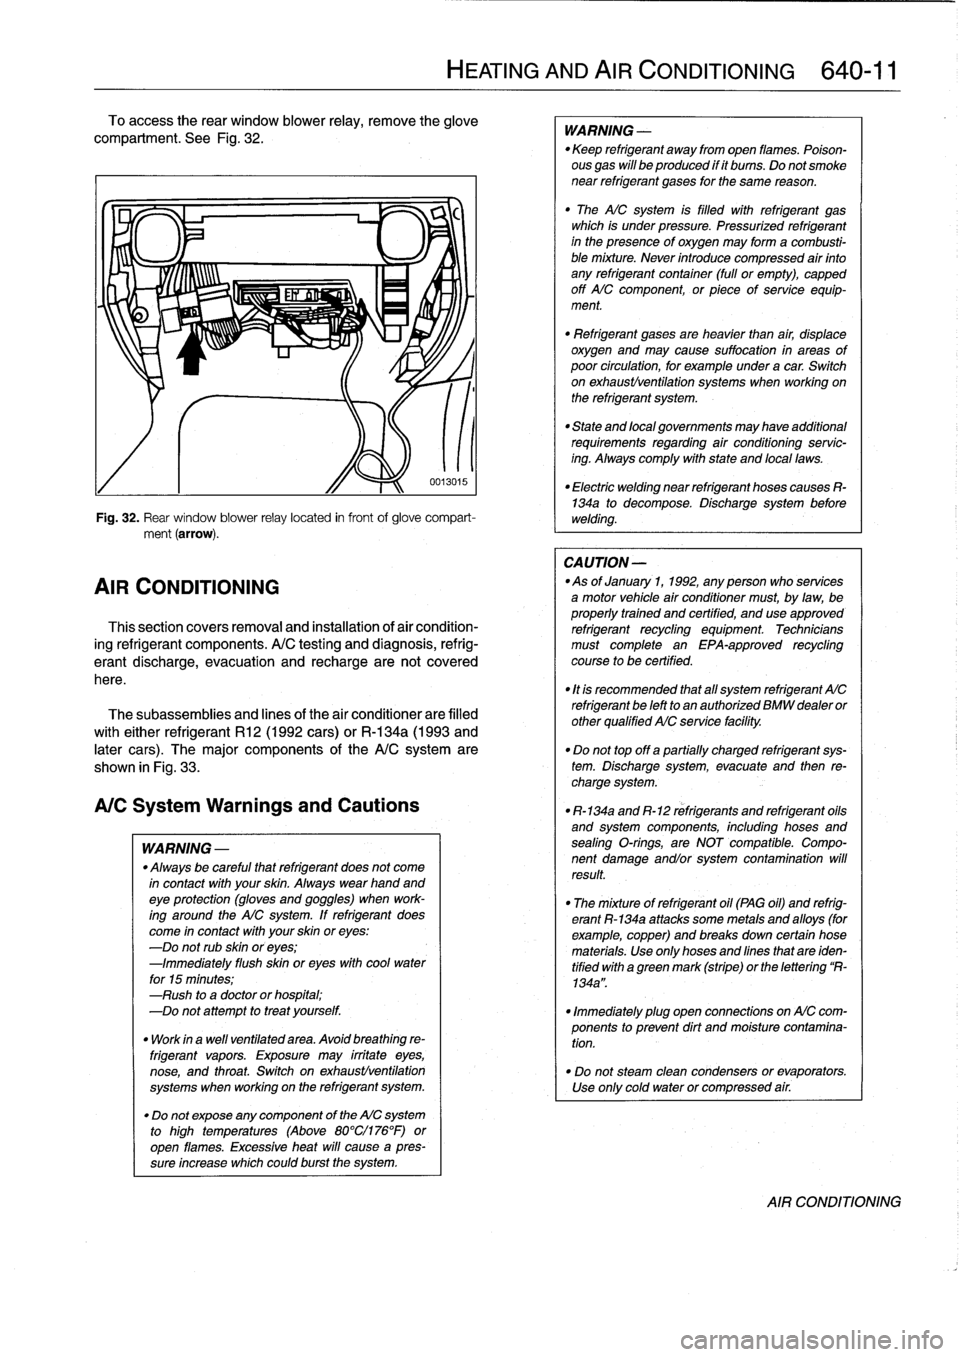 BMW M3 1995 E36 User Guide To
access
the
rear
window
blower
relay,
remove
the
glove
compariment
.
See
Fig
.
32
.

Fig
.
32
.
Rear
window
blower
relay
located
in
frontof
glove
compart-
ment
(arrow)
.

AIR
CONDITIONING

Thissecti